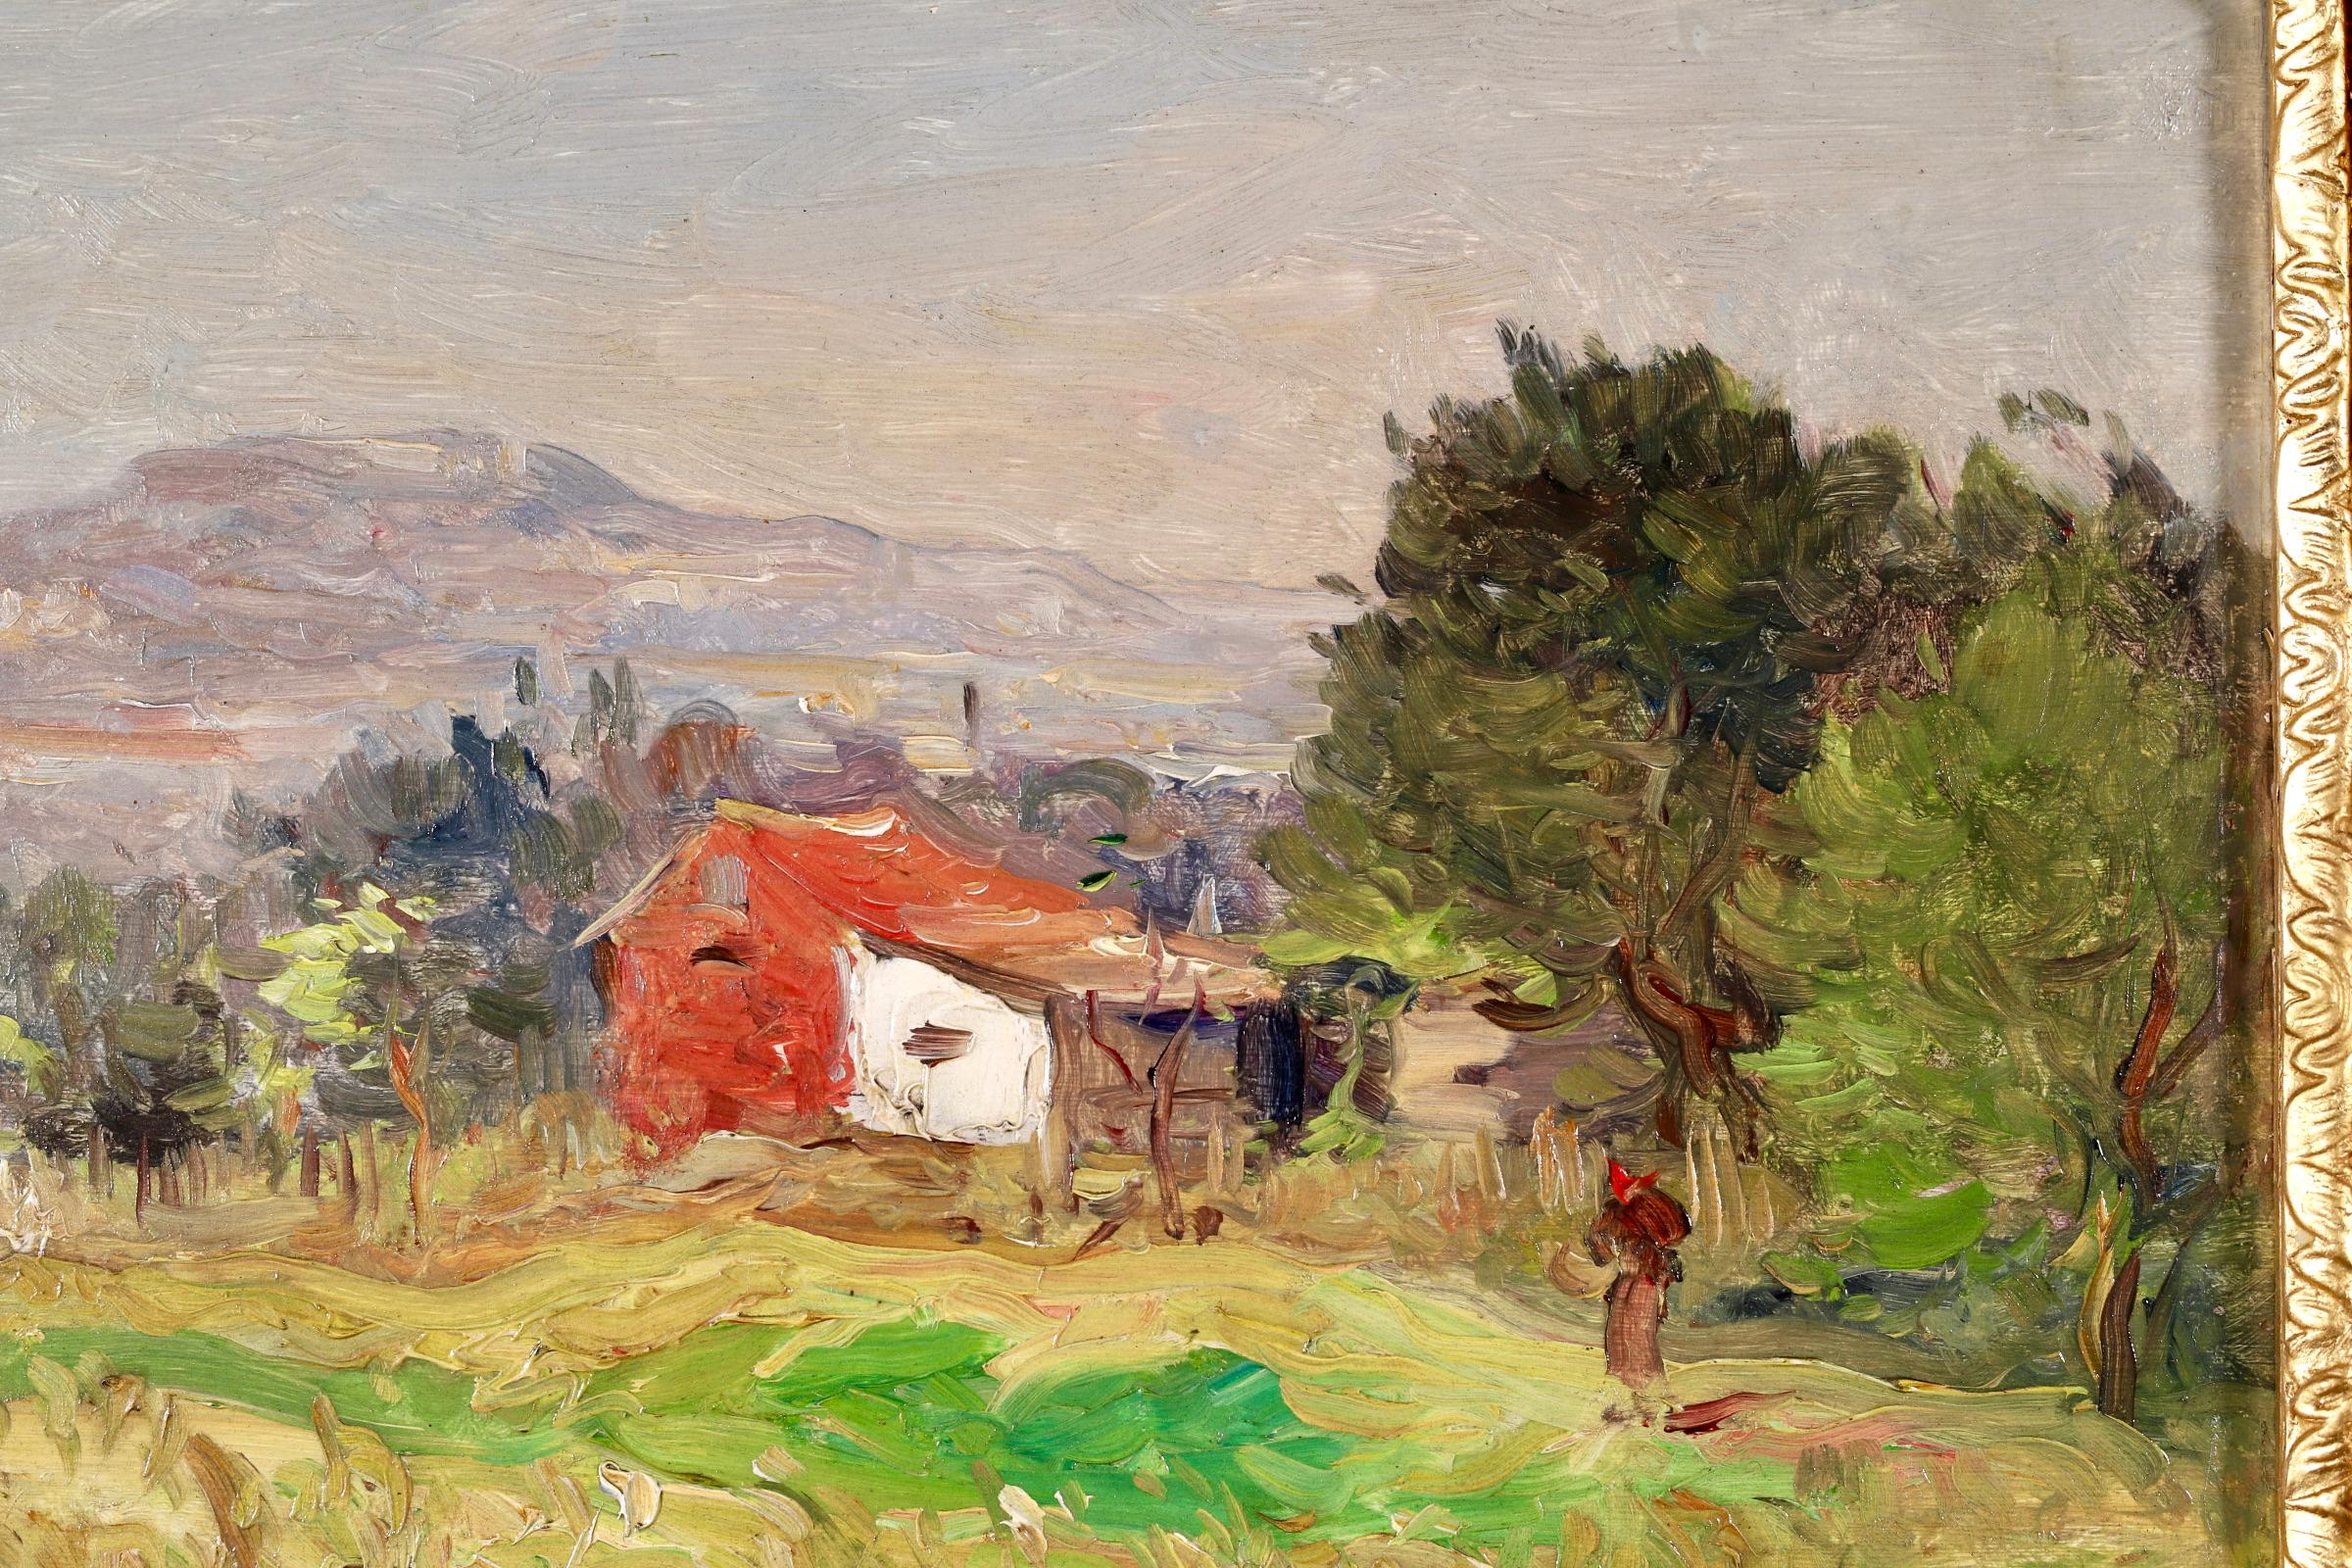 Signed figure in landscape oil on panel circa 1890 by French impressionist painter Jean Baptiste Antoine Guillemet. The piece depicts a red farm building in a rural landscape. A woman is walking across the green field beside trees and there is a